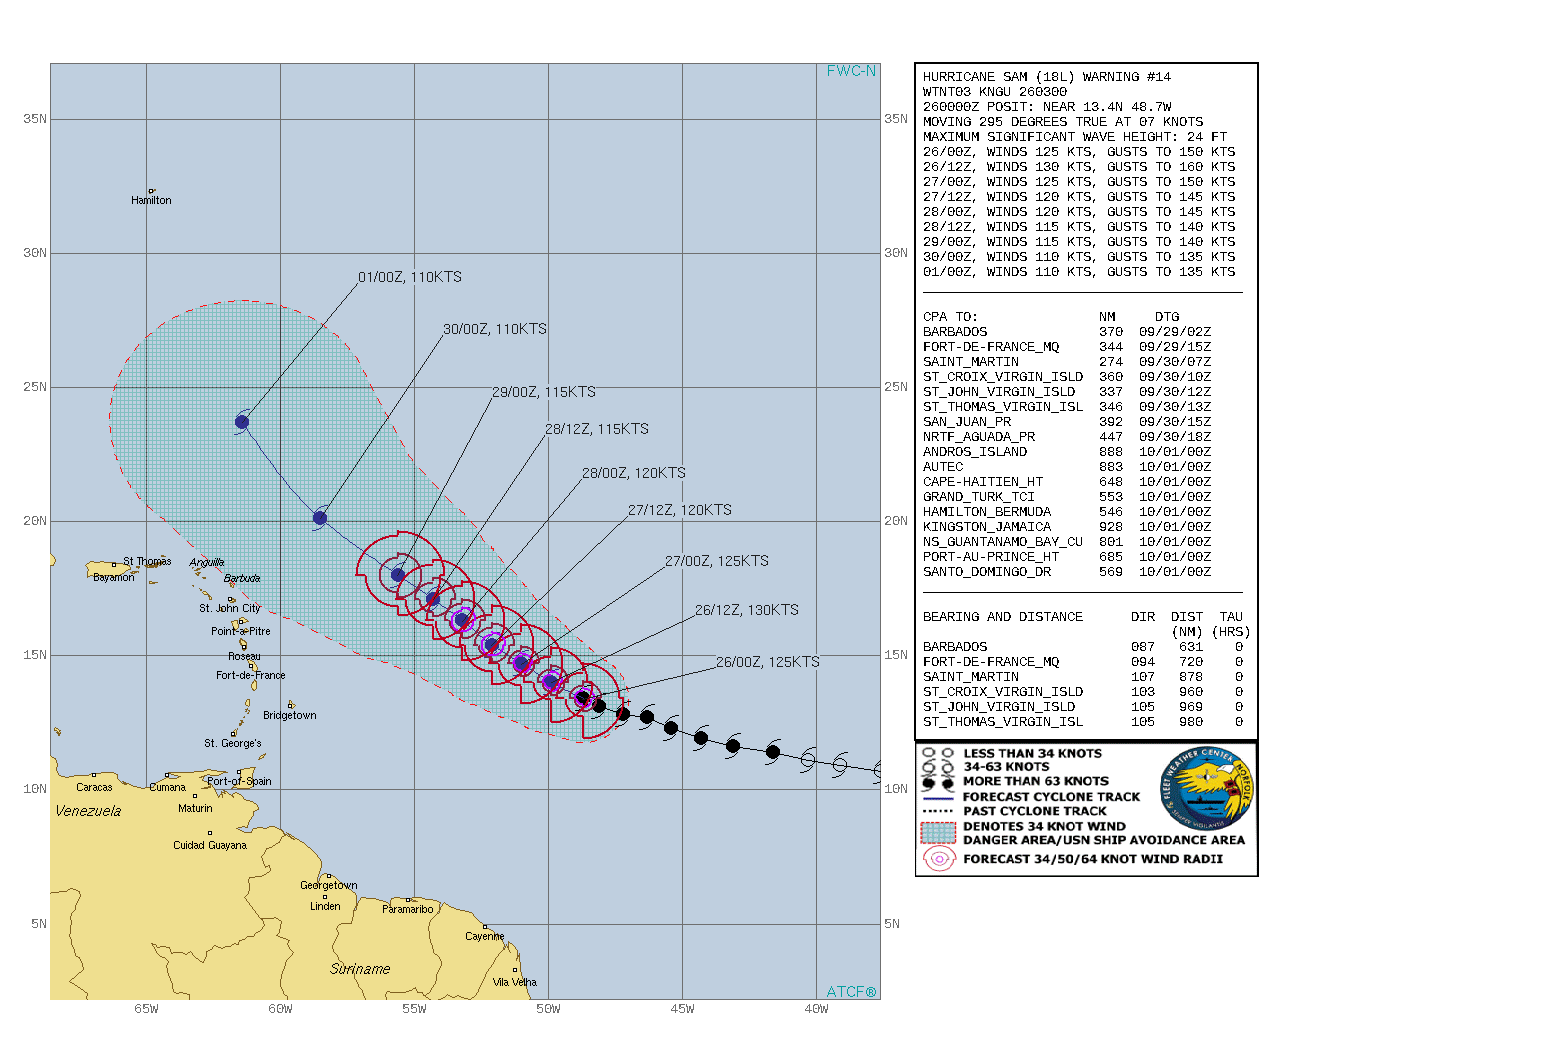 CURRENT INTENSITY IS 125KNOTS/CAT 4 AND IS FORECAST TO PEAK AT 130KNOTS "SUPER HURRICANE" AT 26/12UTC.